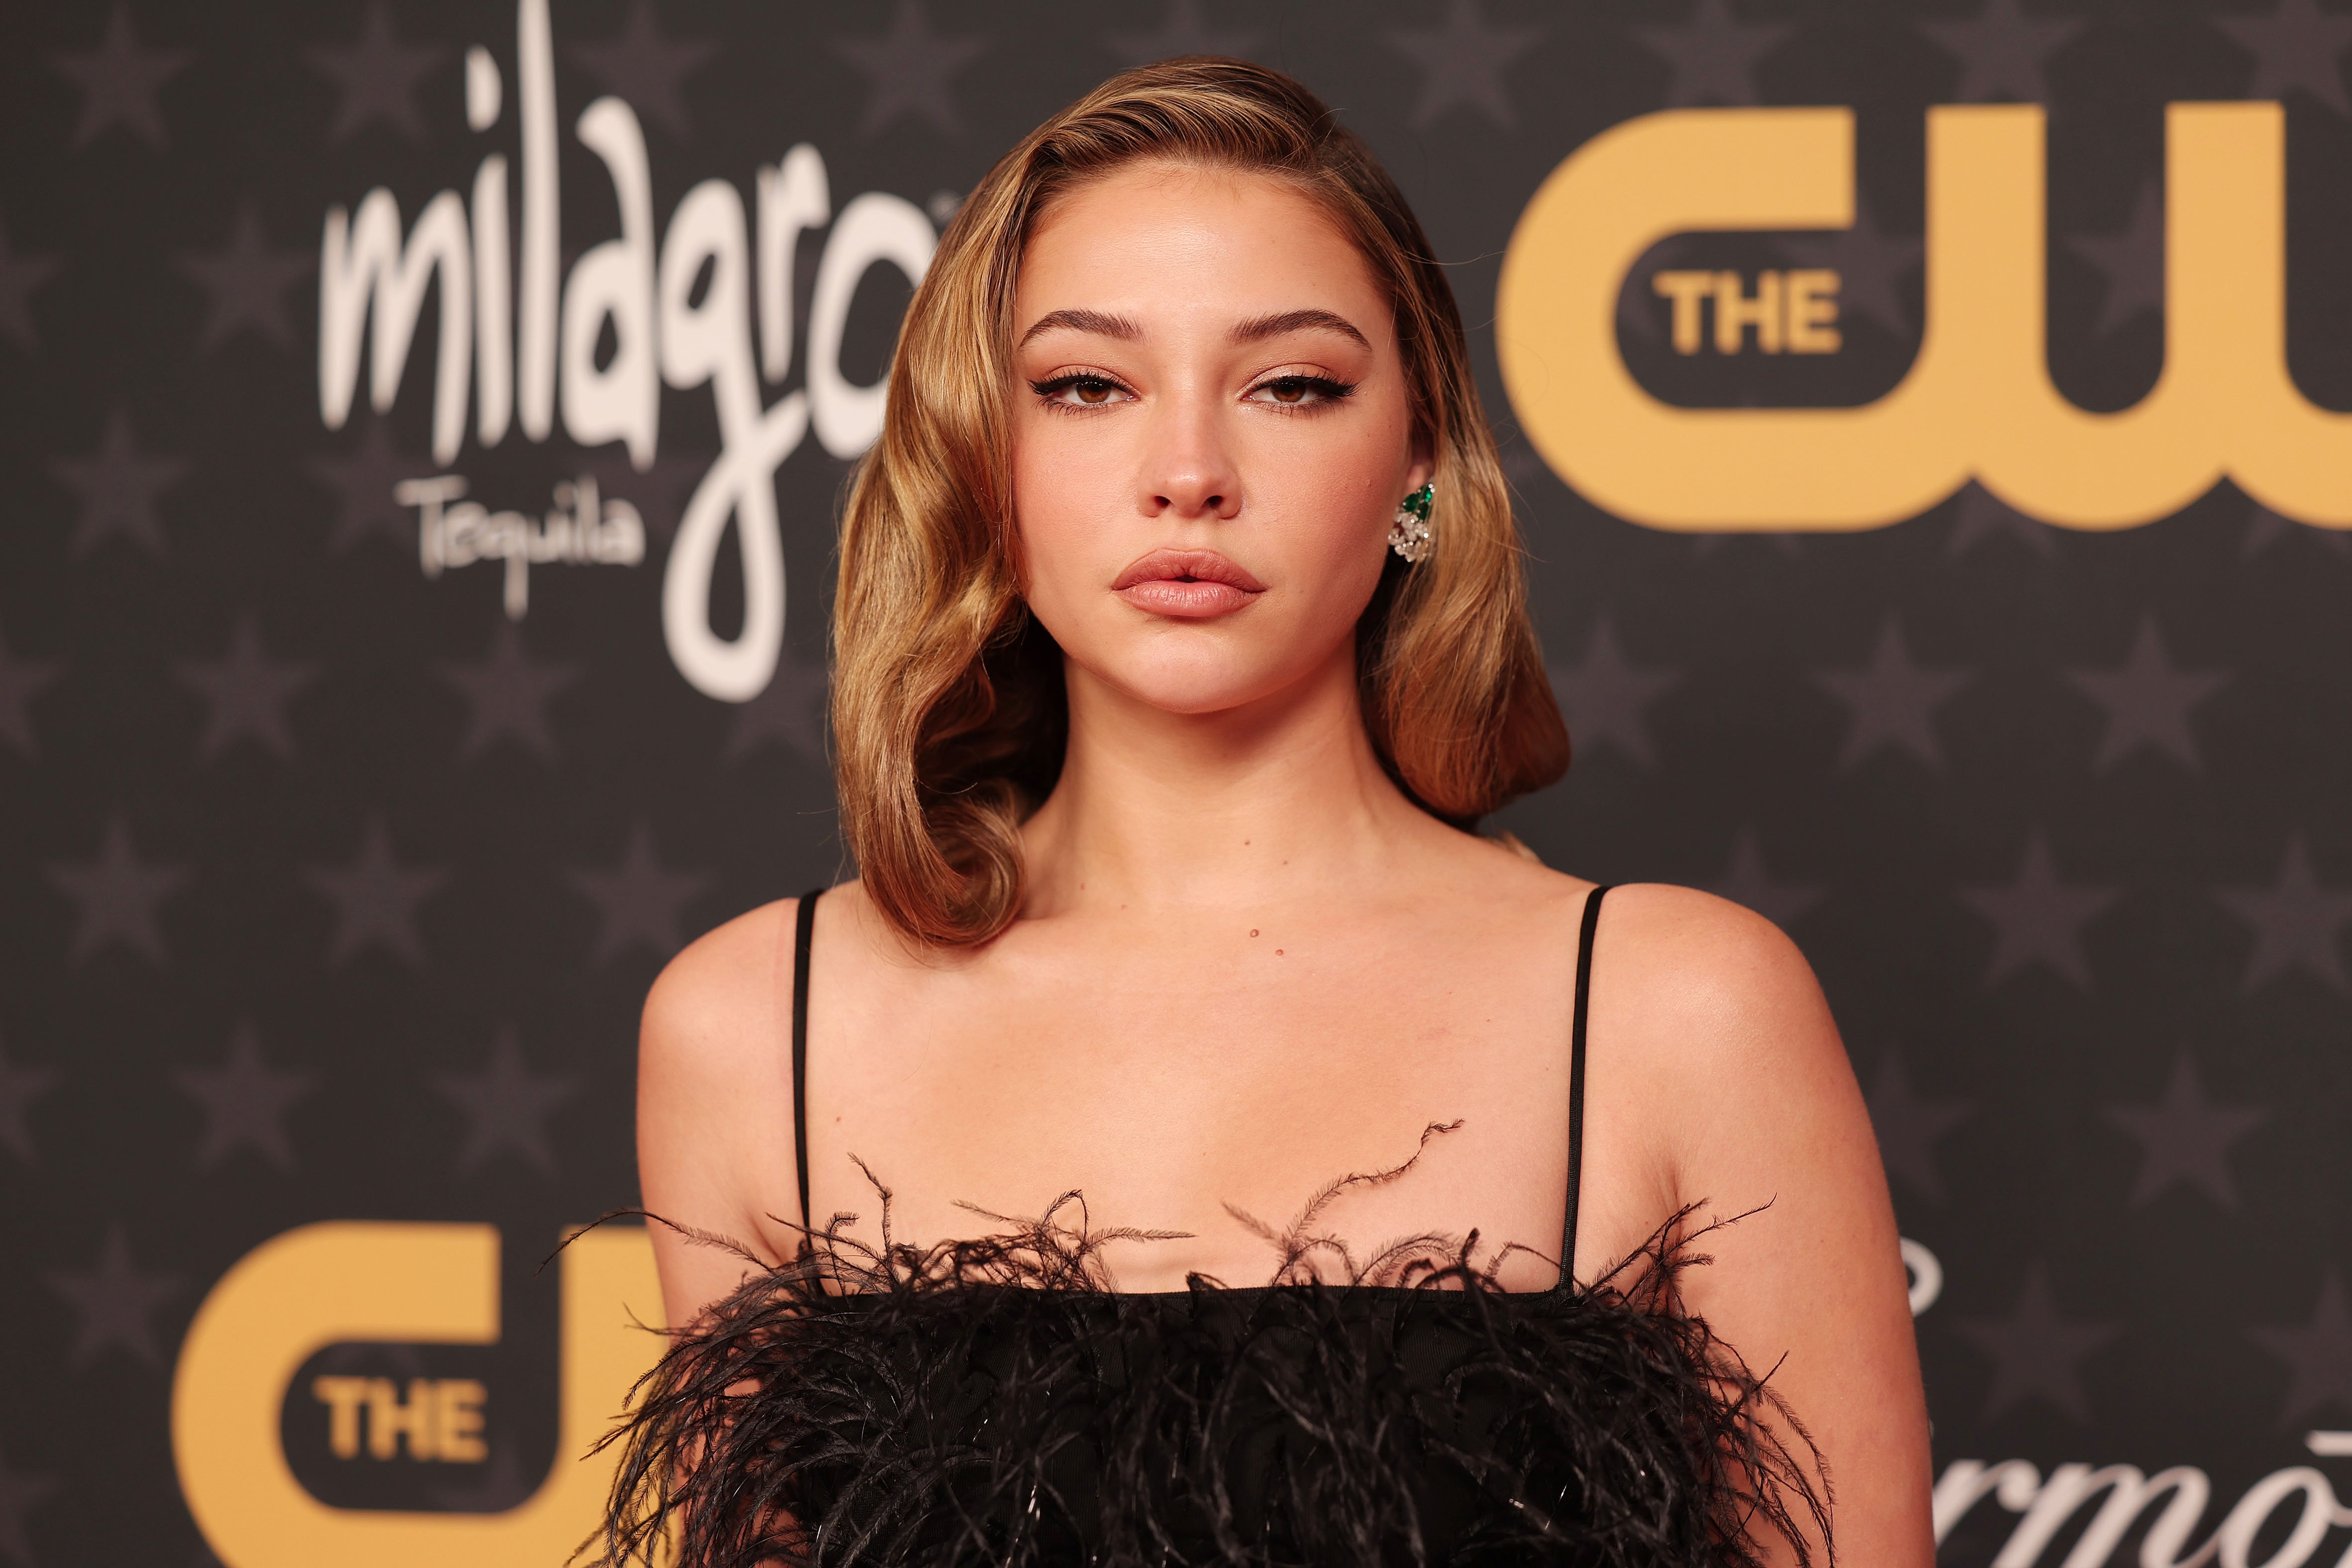 Madelyn Cline poses at the 28th Critics' Choice Awards held at the Fairmont Century Plaza on January 15, 2023, in Los Angeles, California | Source: Getty Images